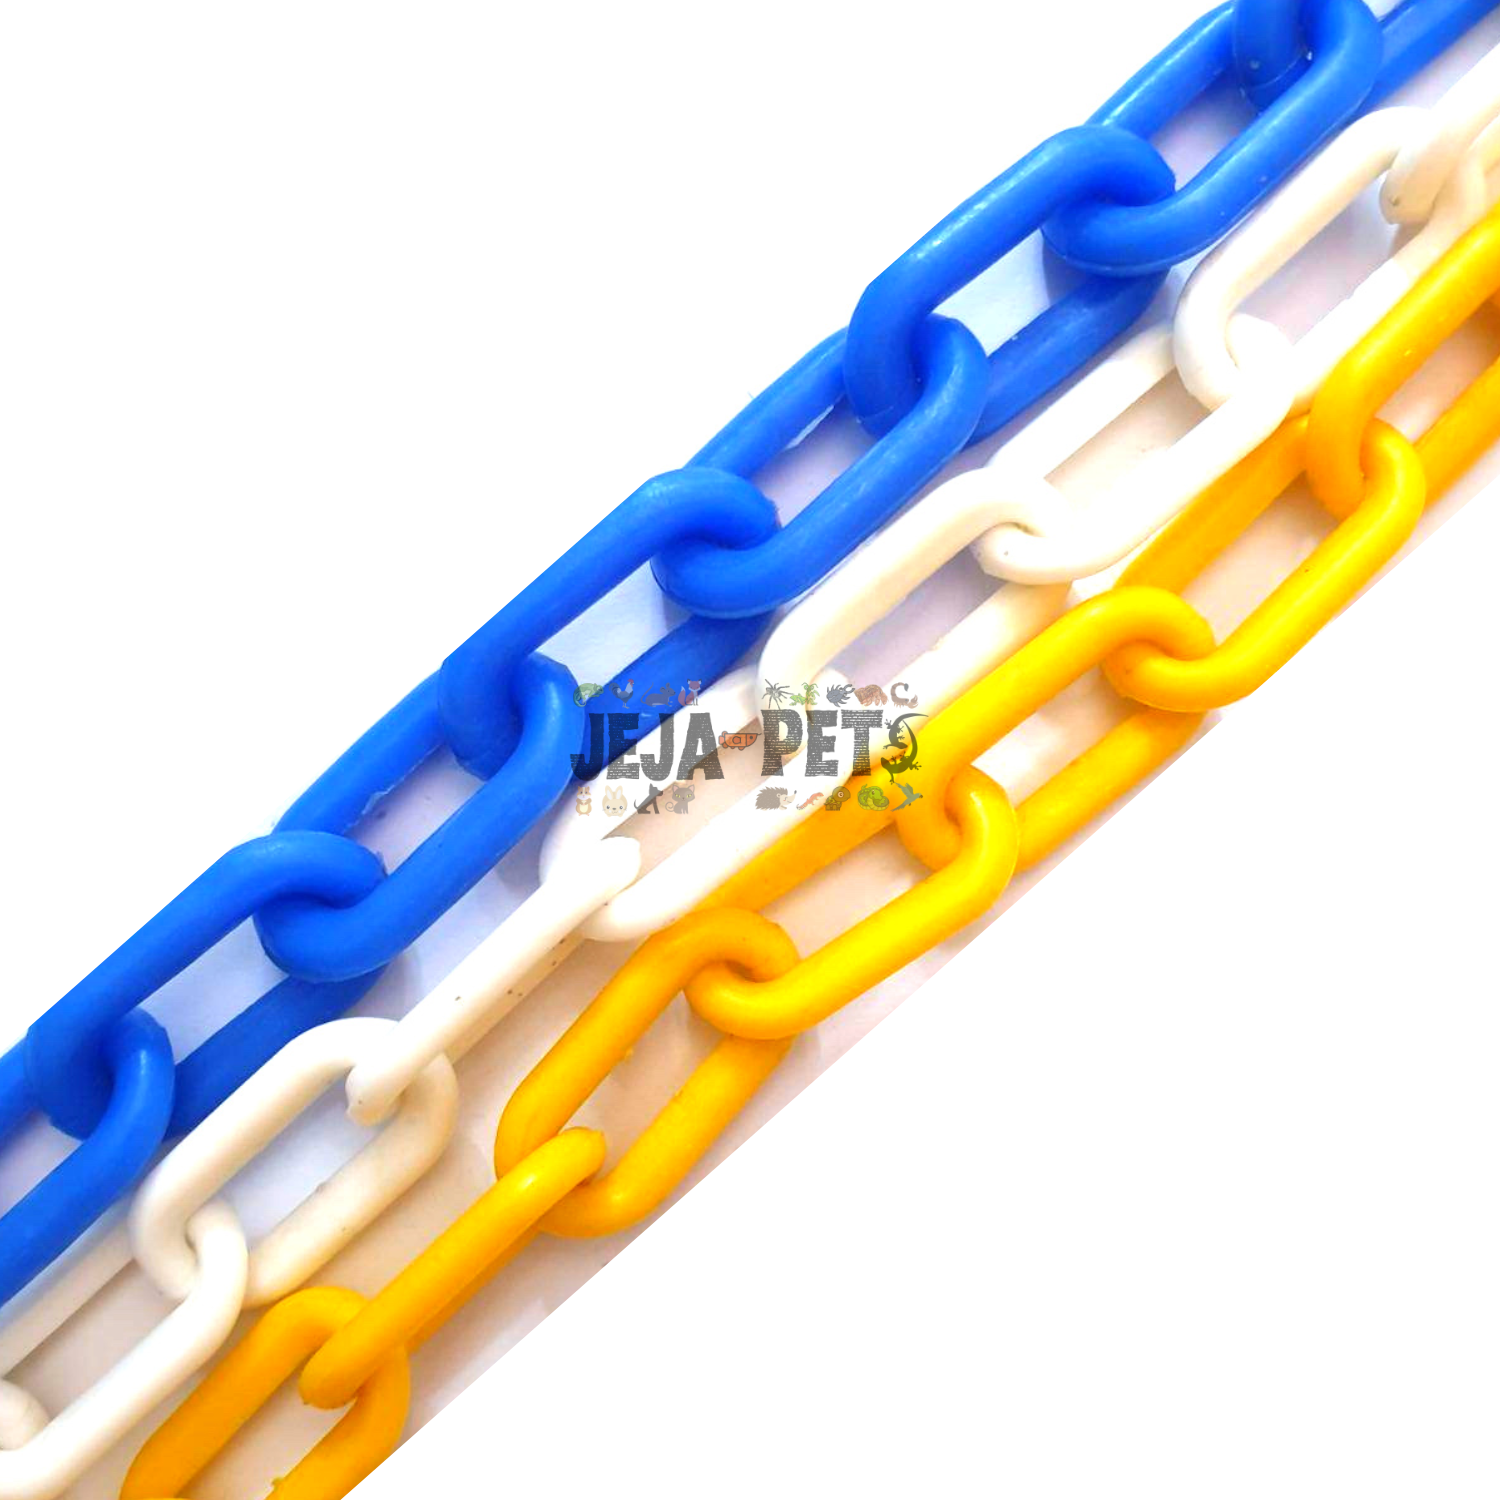 Heavy Duty C Link Plastic Chains - Large